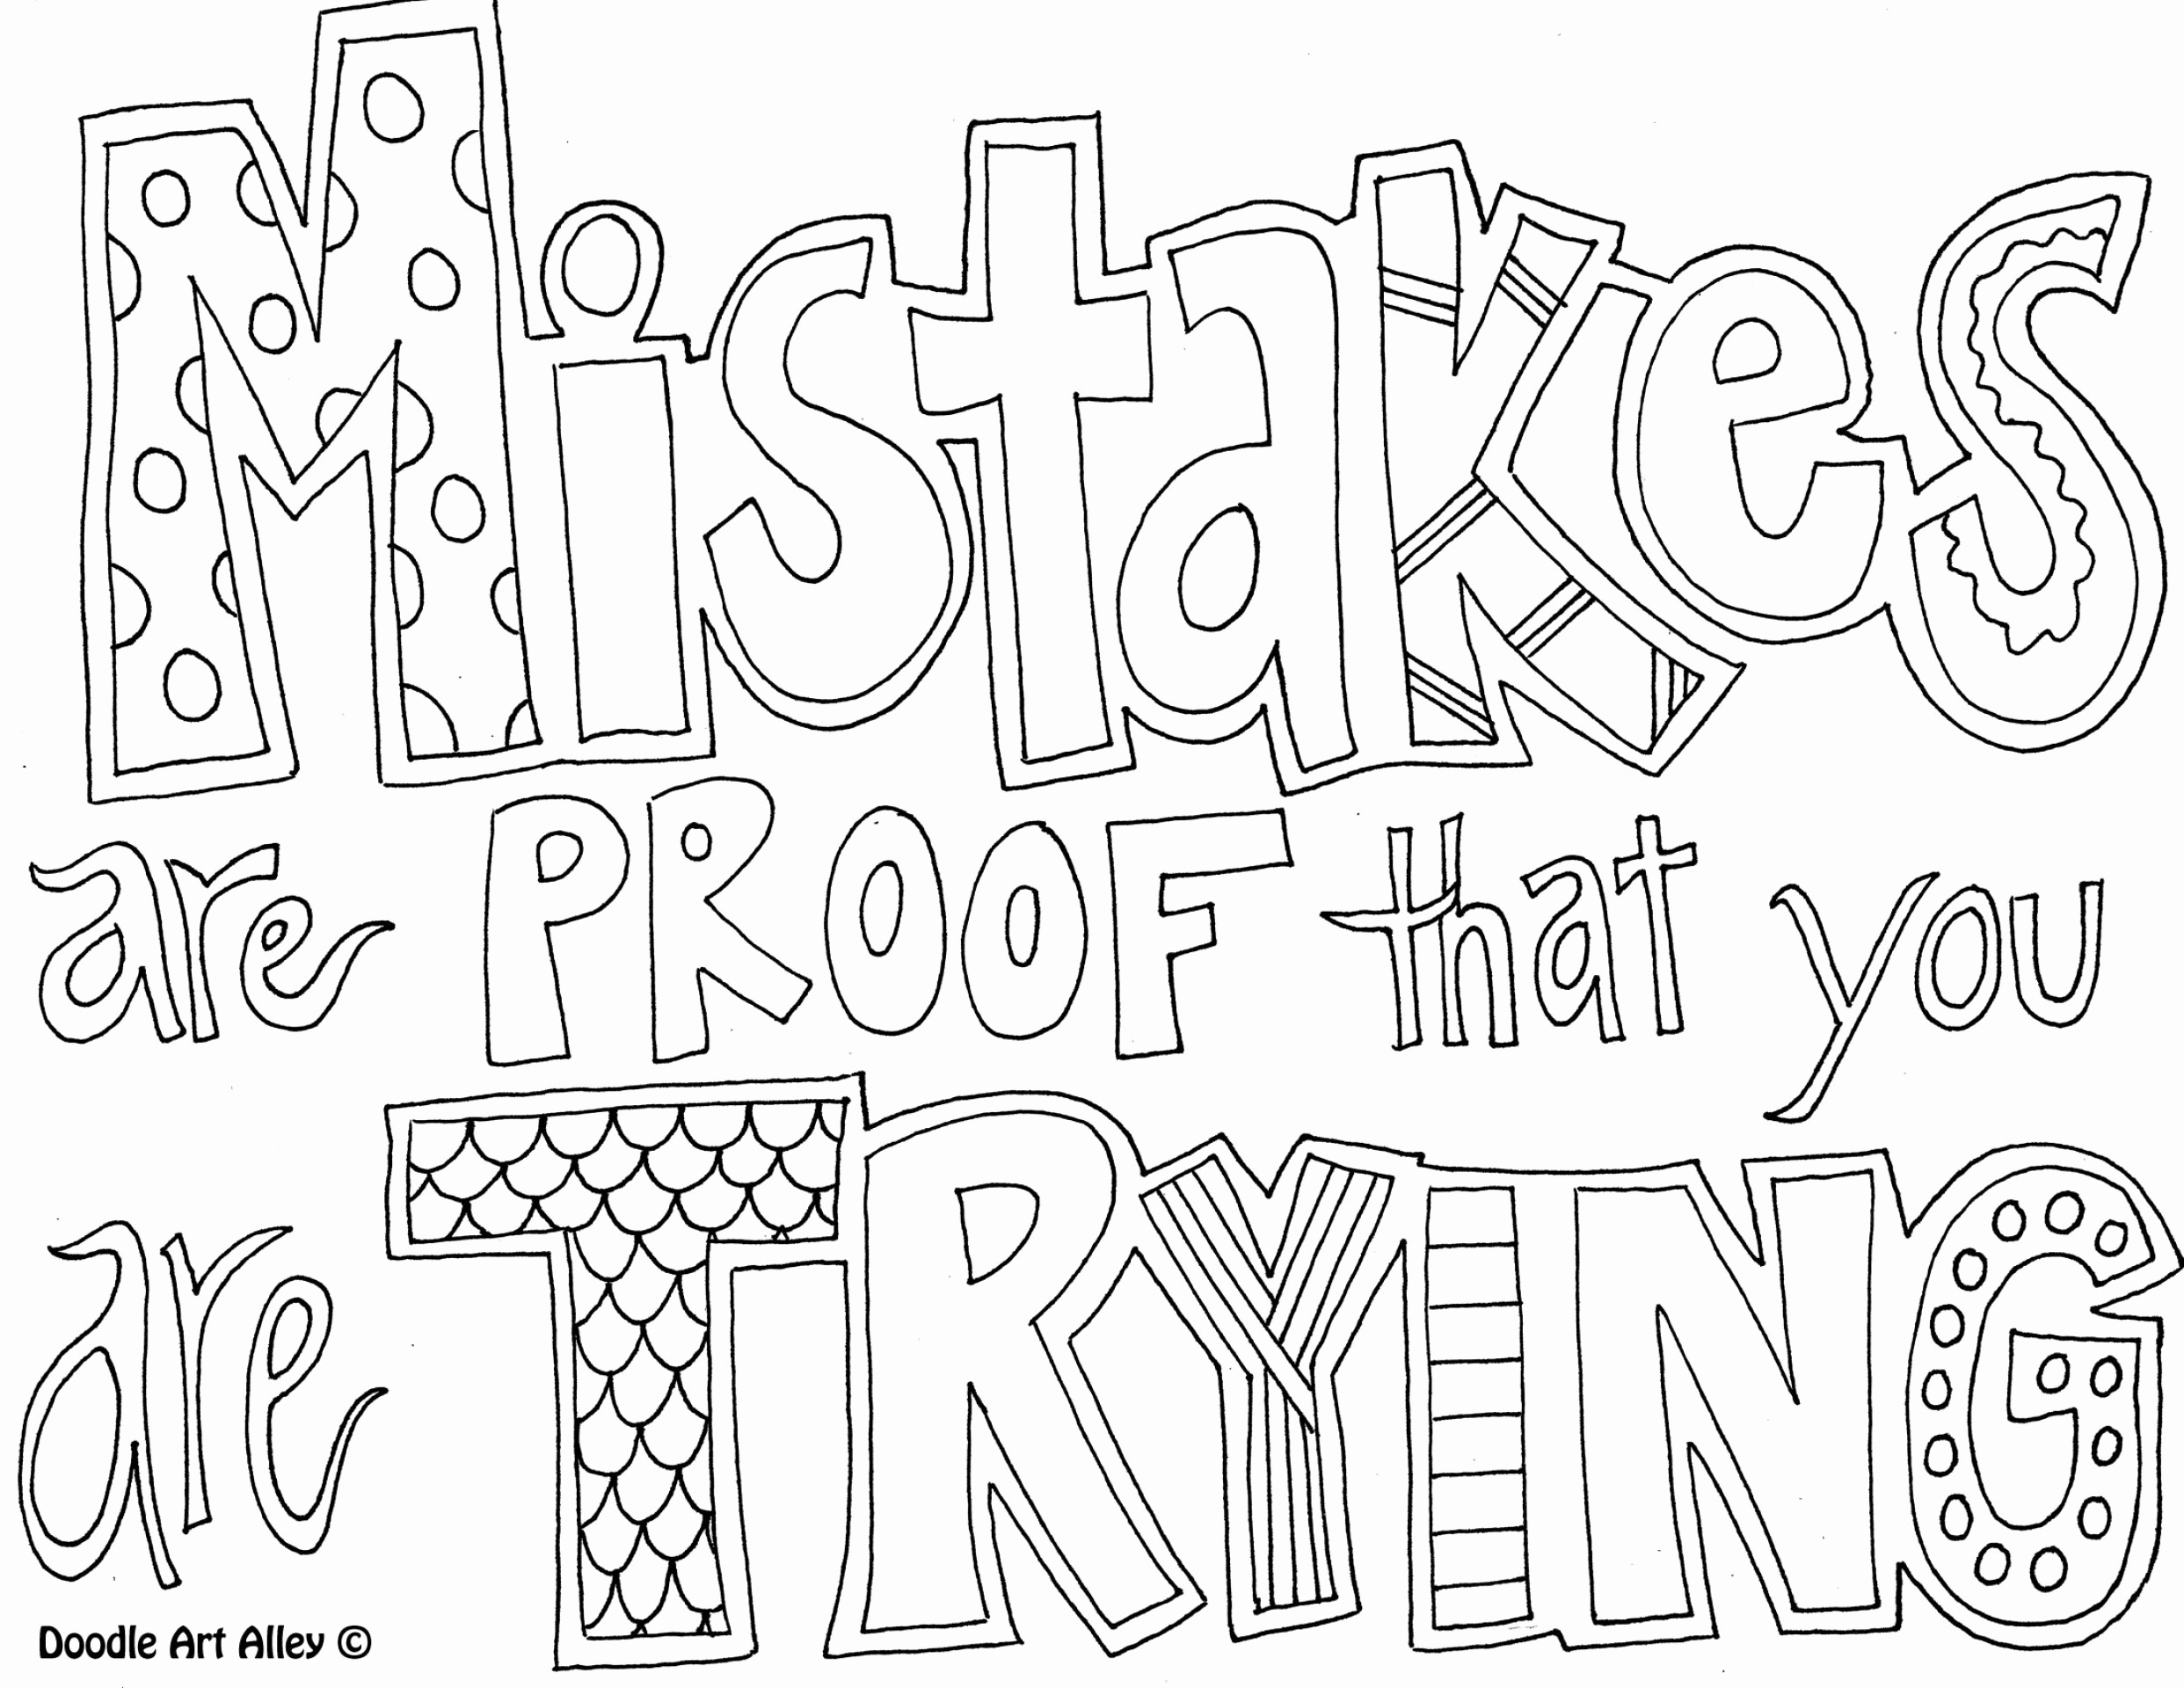 Coloring Pages : Inspiring Quotes Coloringges Lovely ...